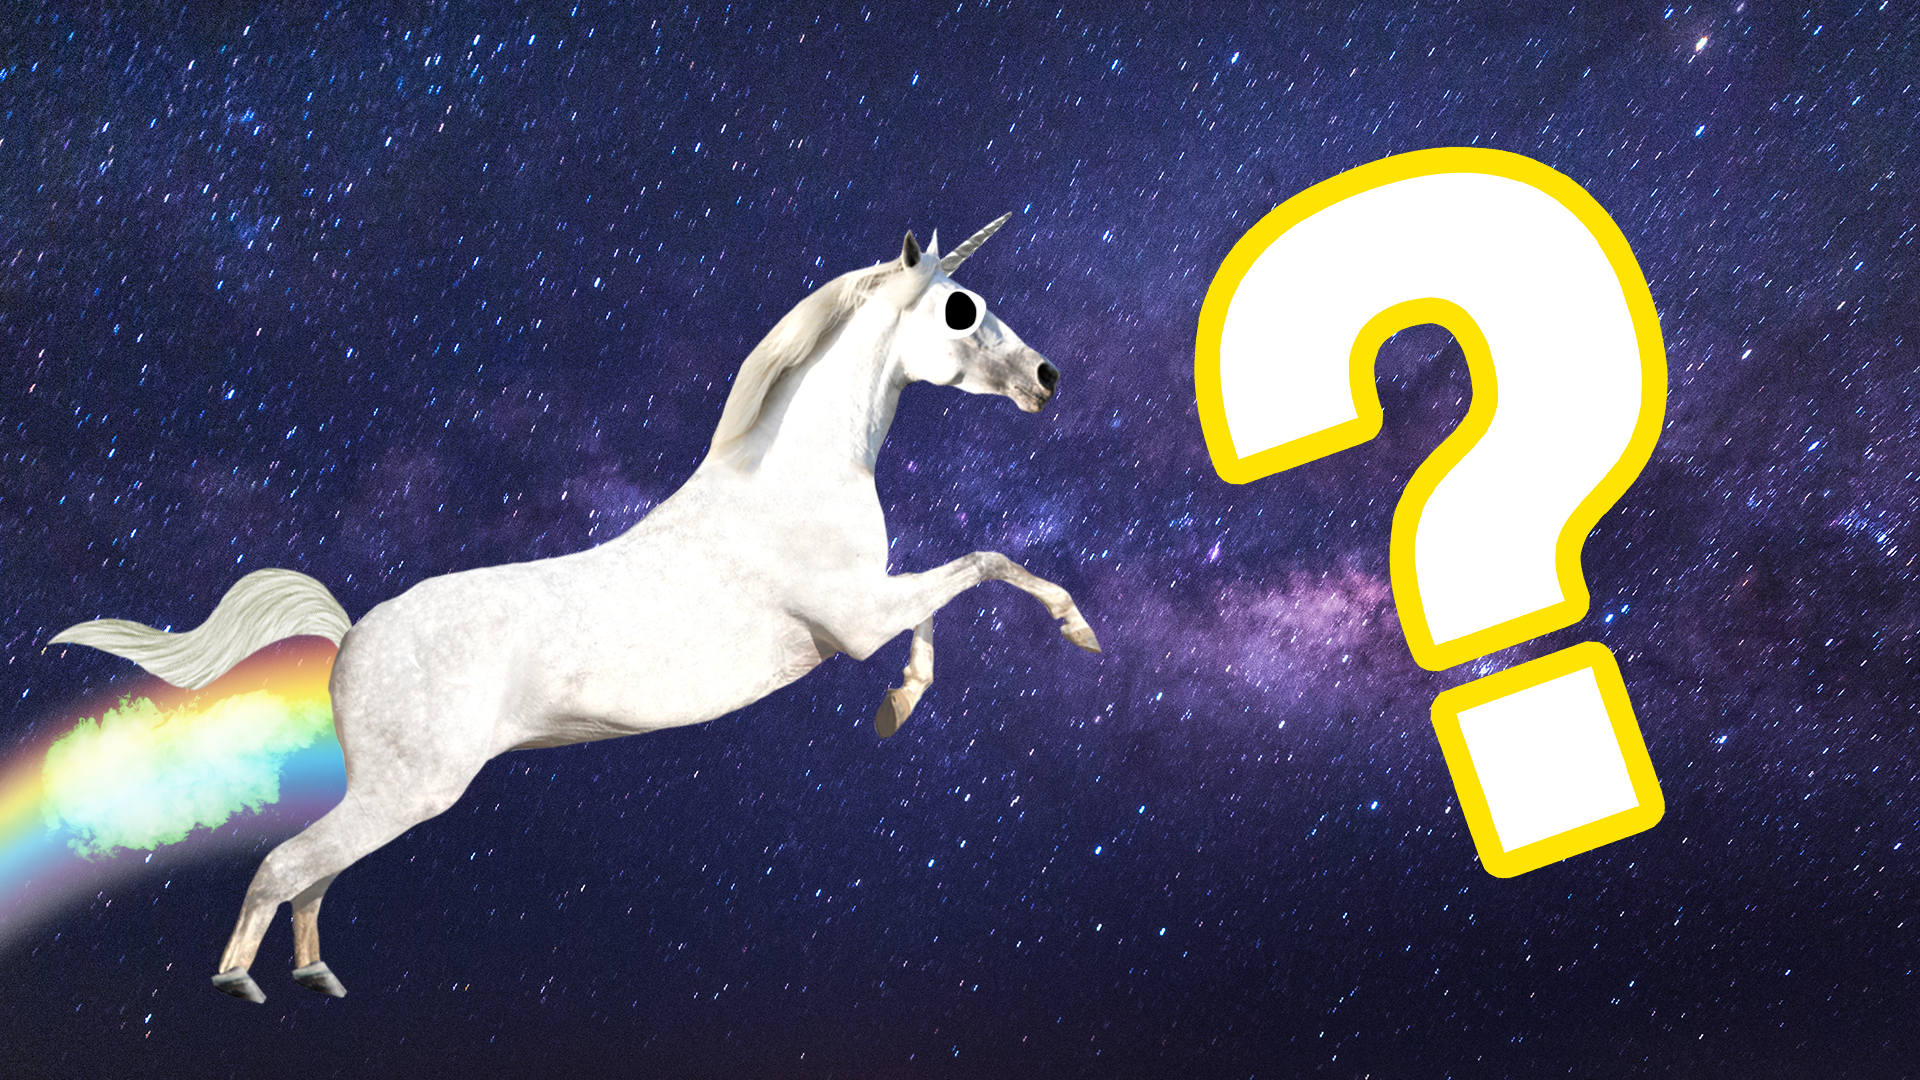 Unicorn on starry background with question mark